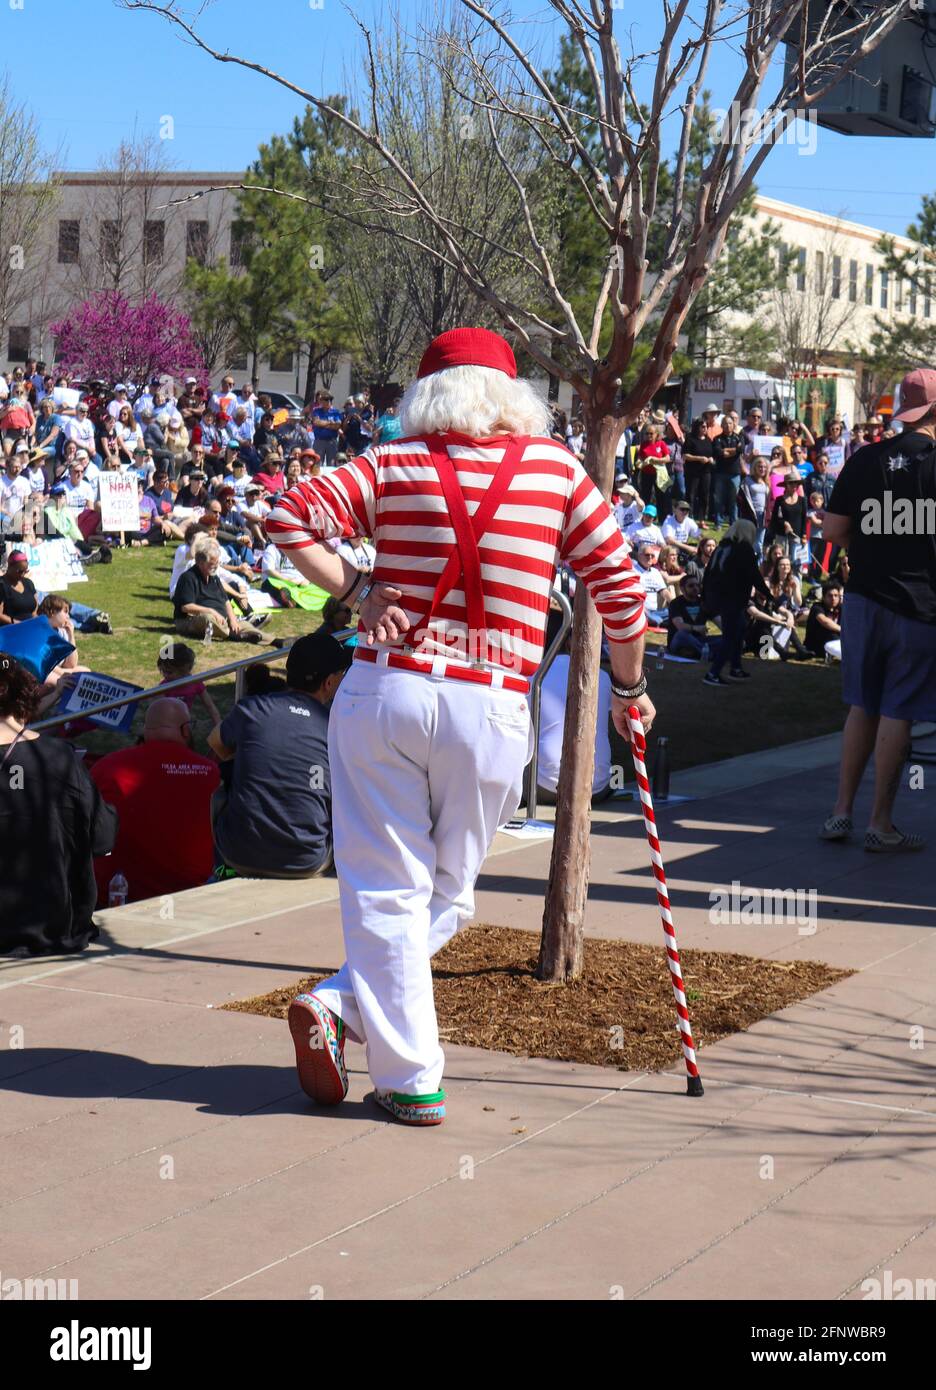 Back of white haired man with bright red and white clothing and cane at March for Life Tulsa Oklahoma USA 3 24 2018 Stock Photo